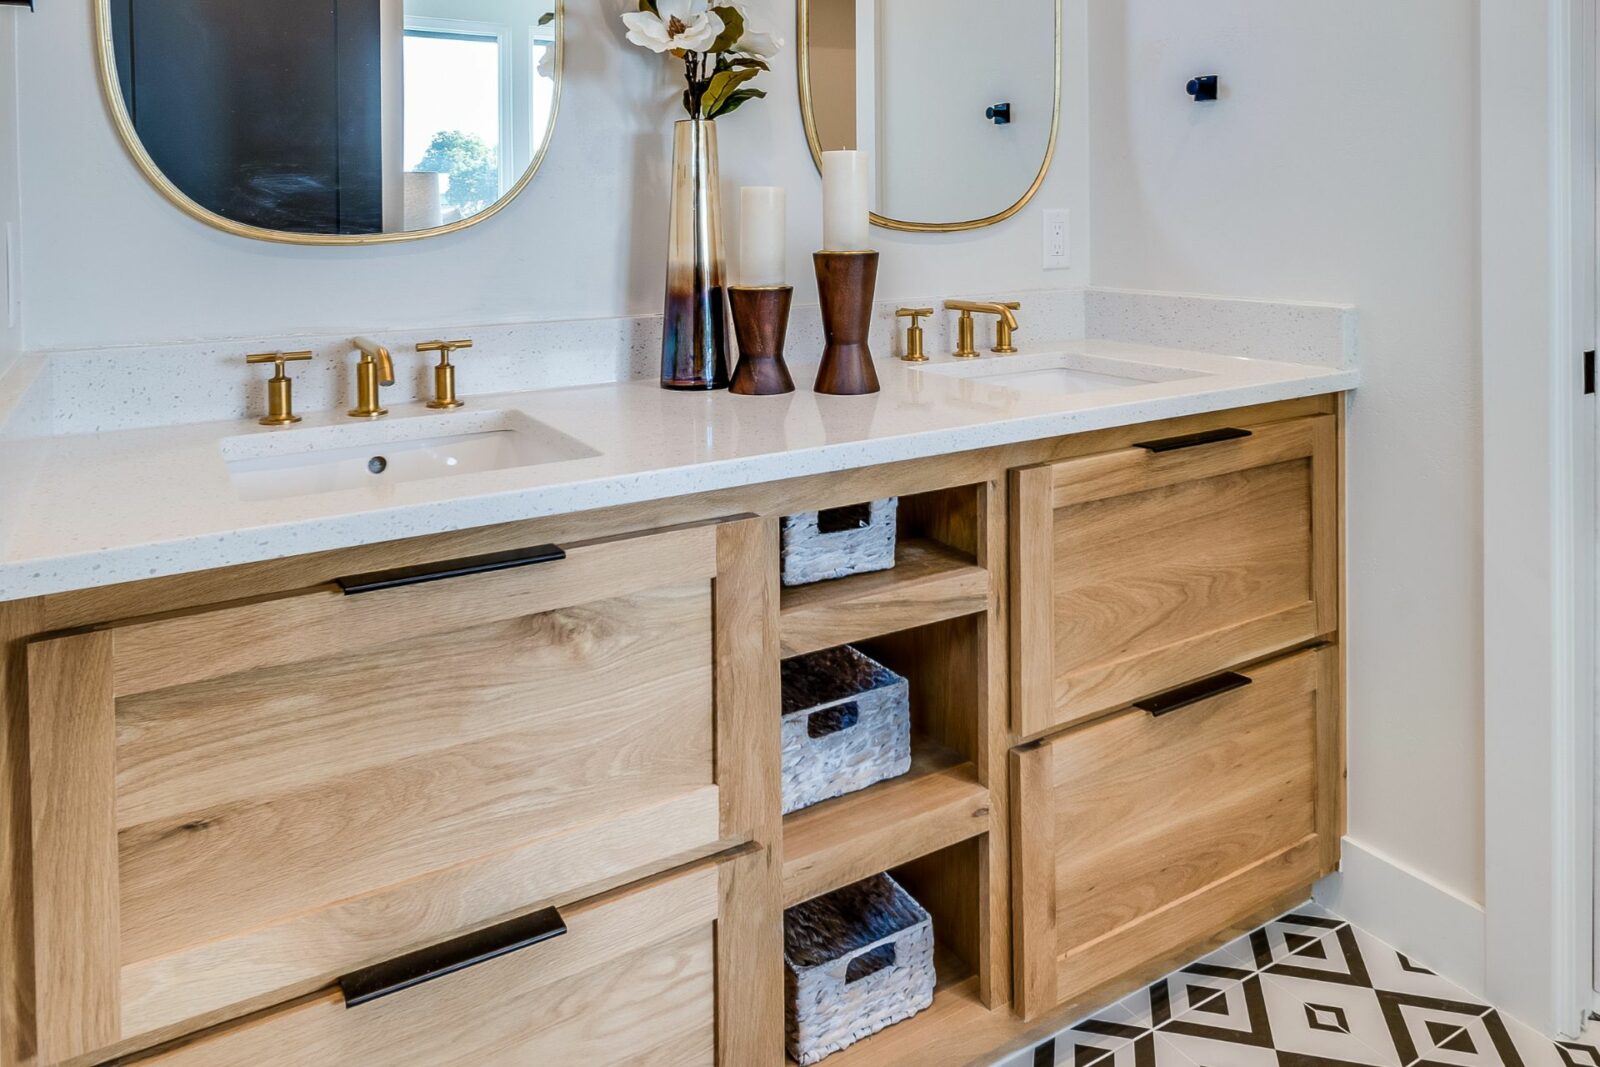 25 Bathroom Cabinet Ideas for a Chic Clutter-Free Space